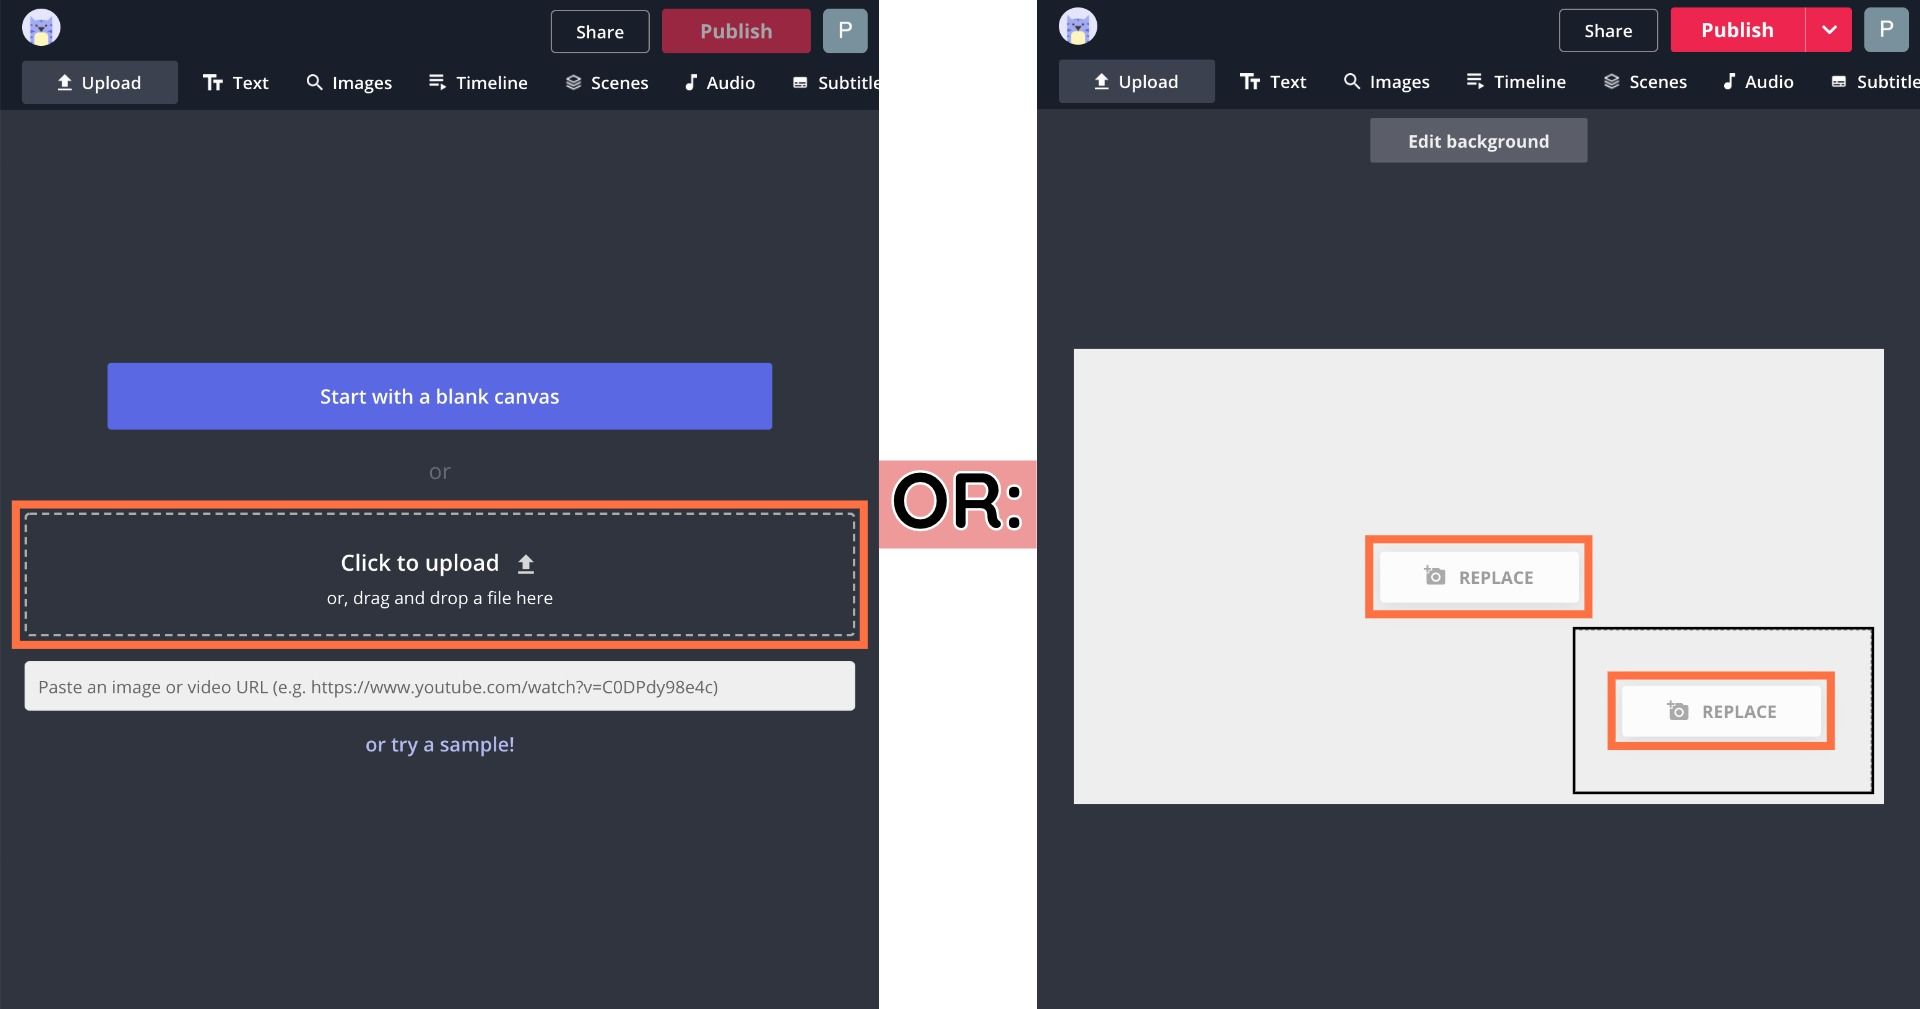 Screenshots from the Kapwing Studio, one of the upload modal and one of the reaction video template. 